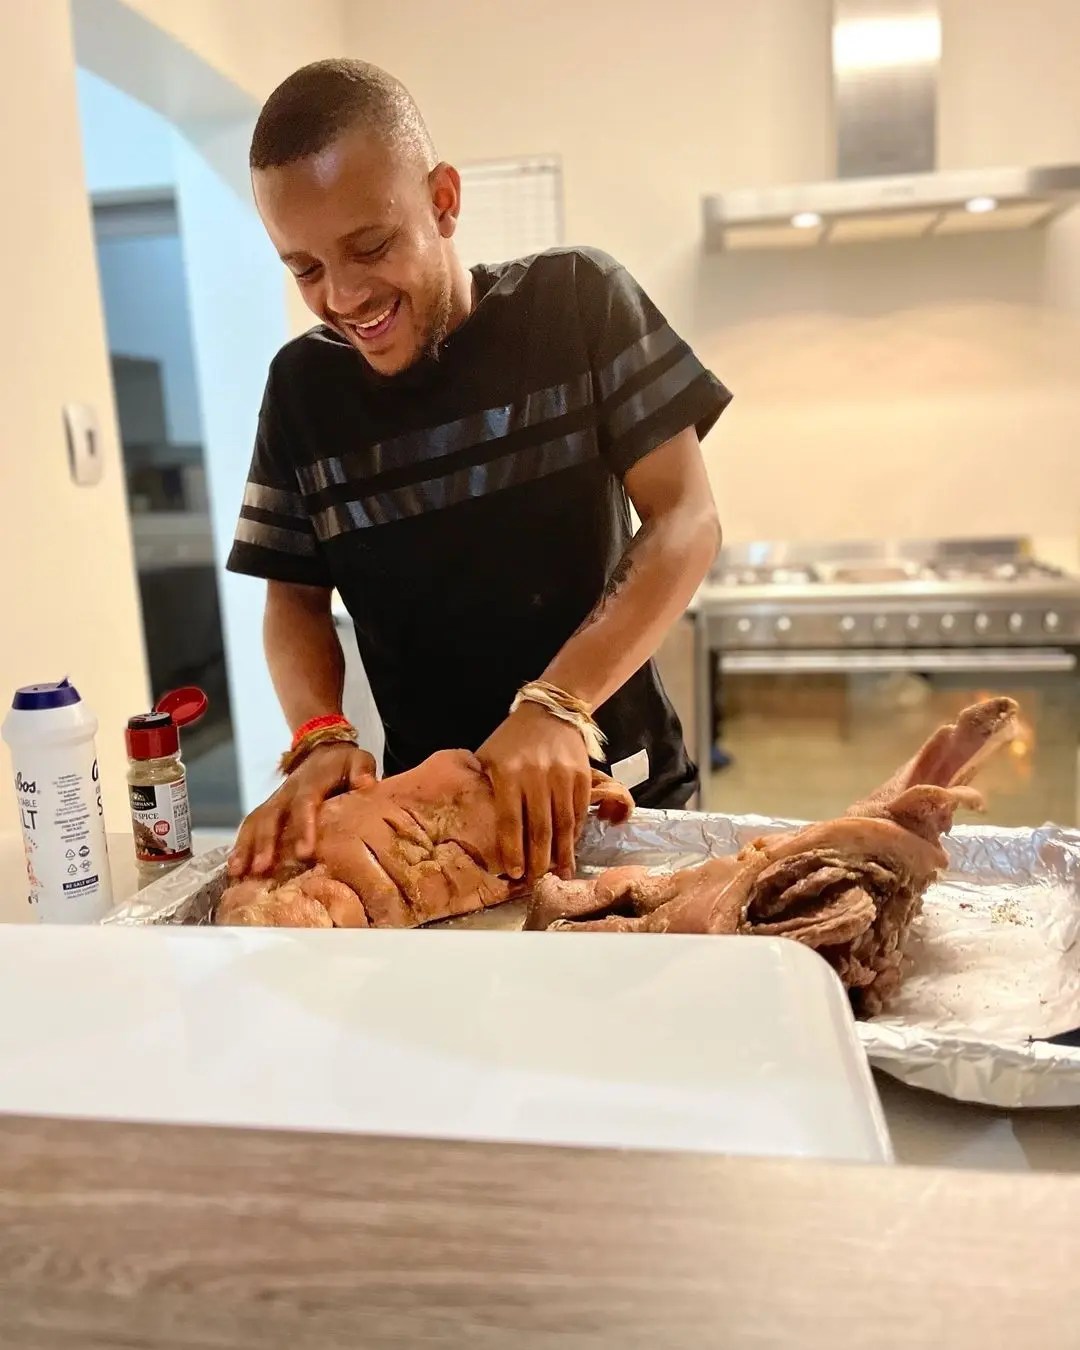 Kabza De Small shows off his cooking skill – Video